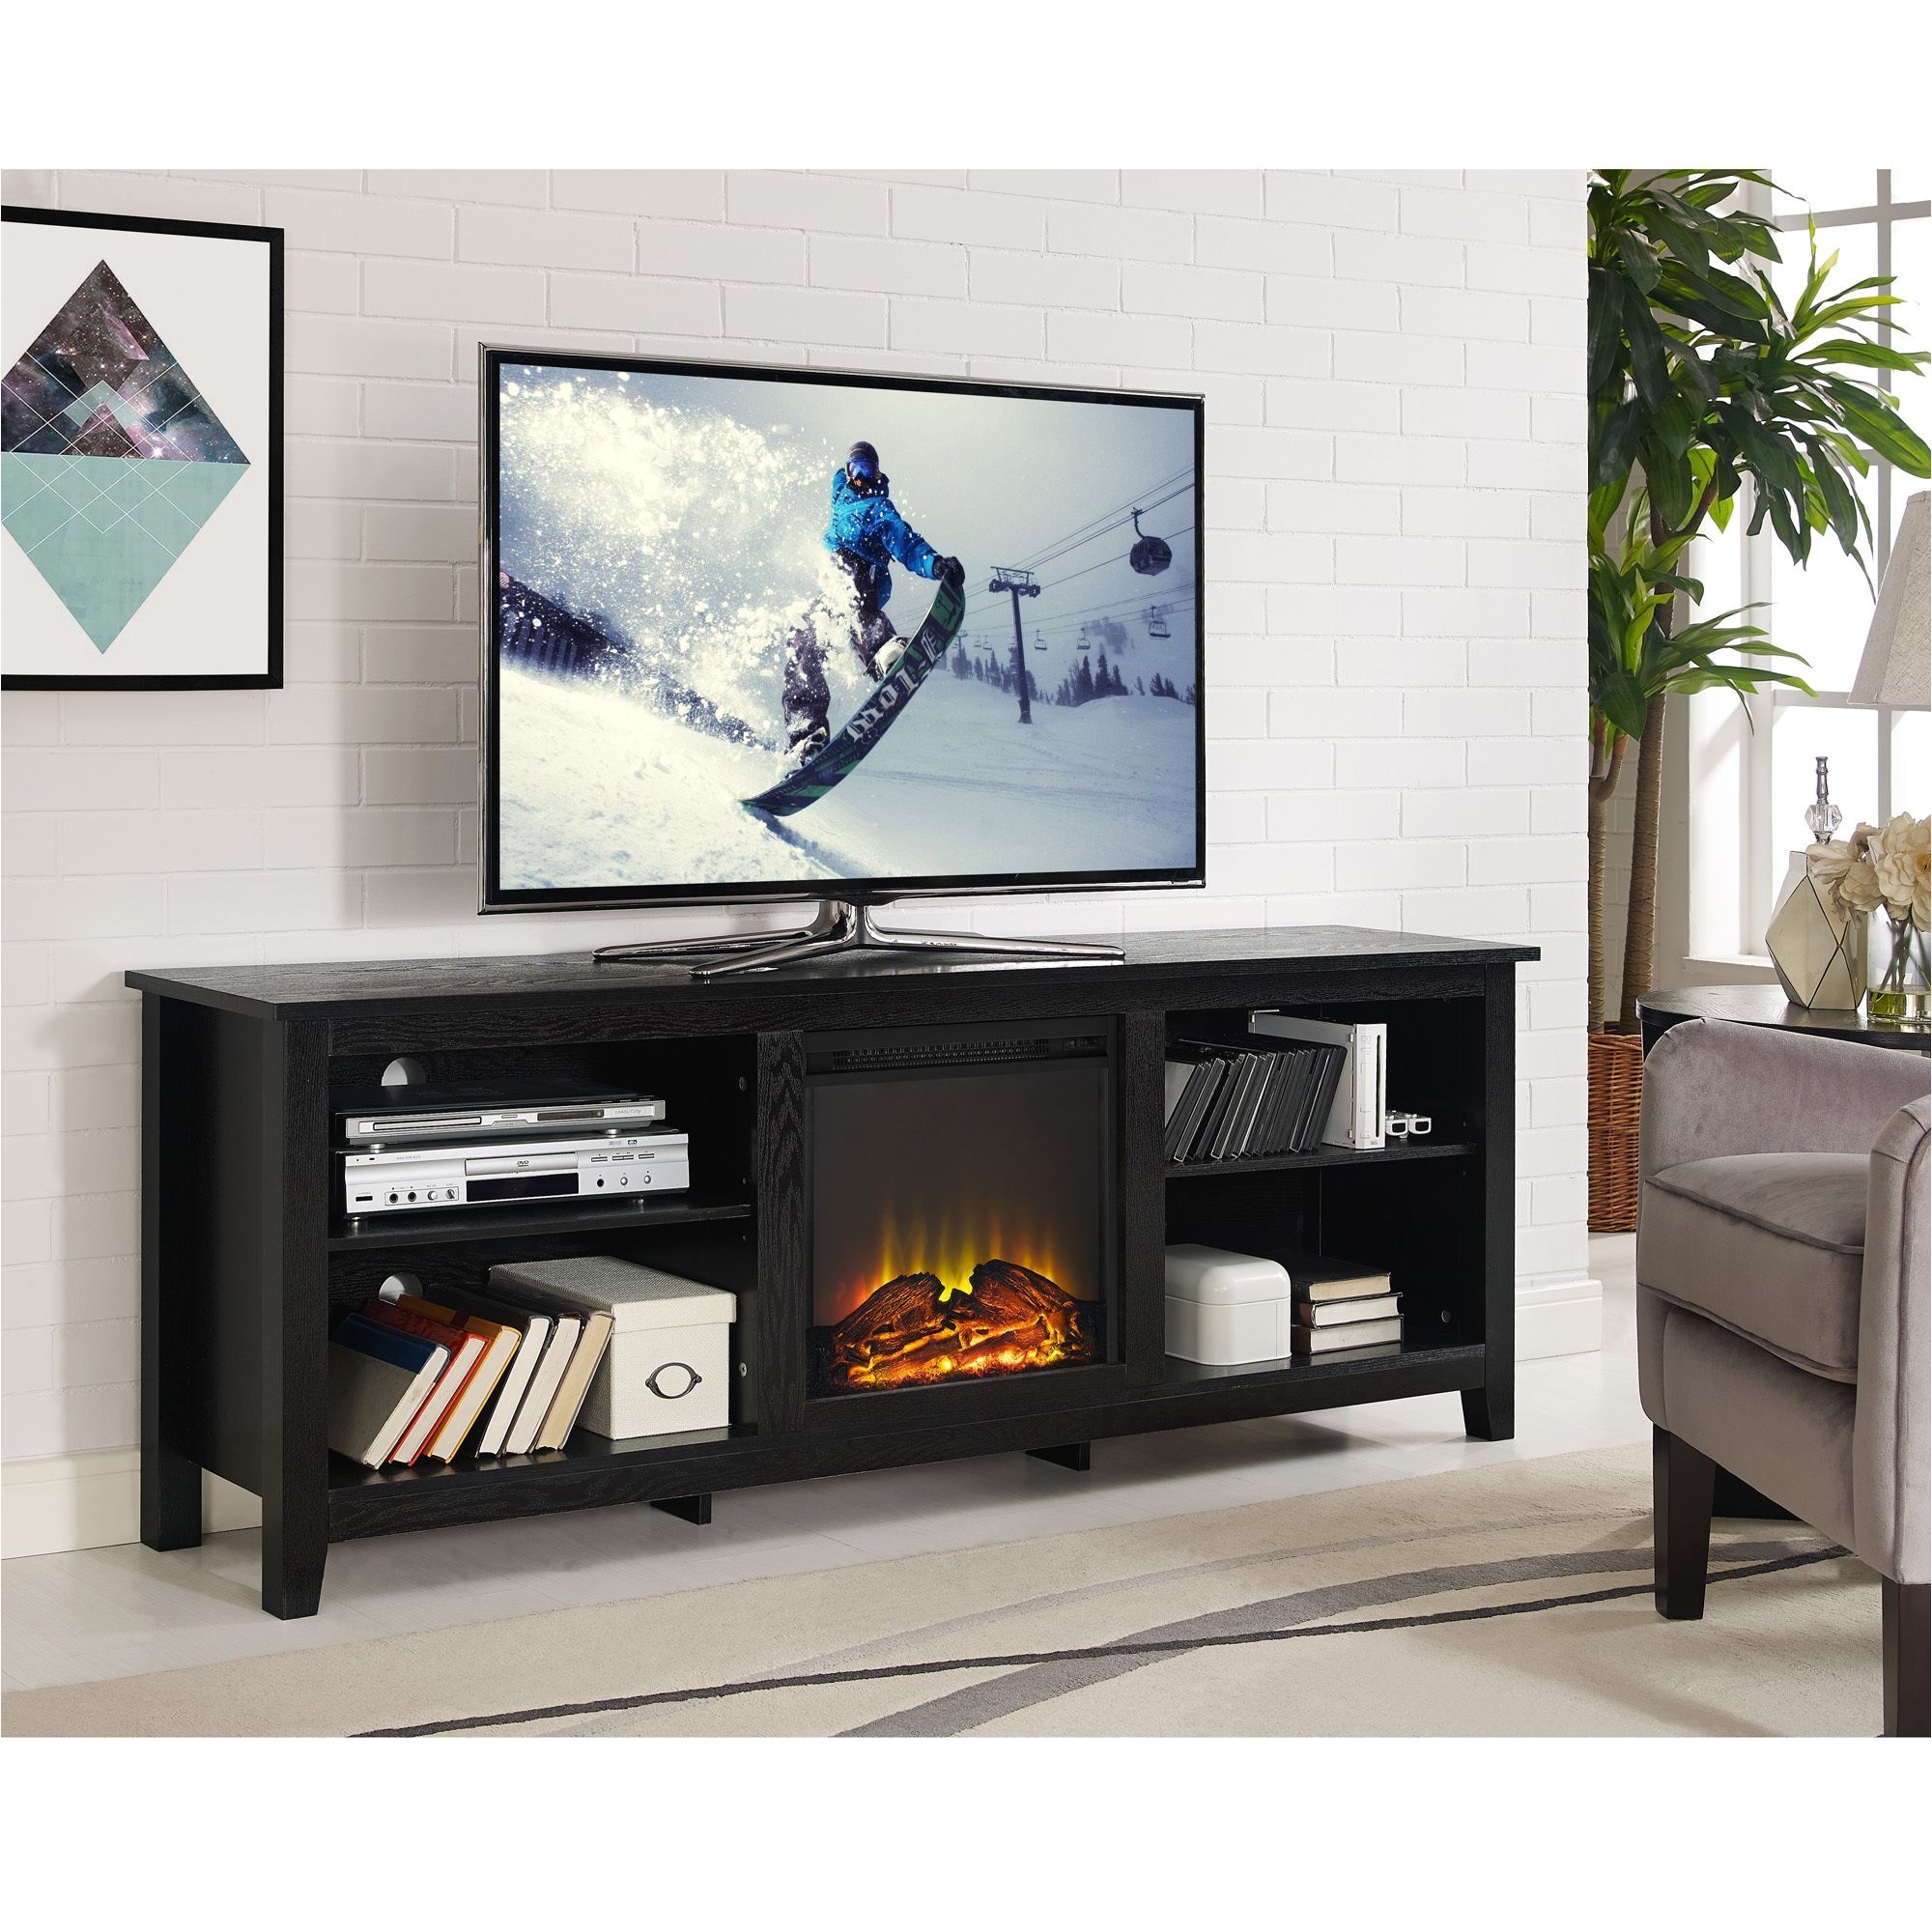 70 inch black fireplace tv stand 70 fireplace tv stand black